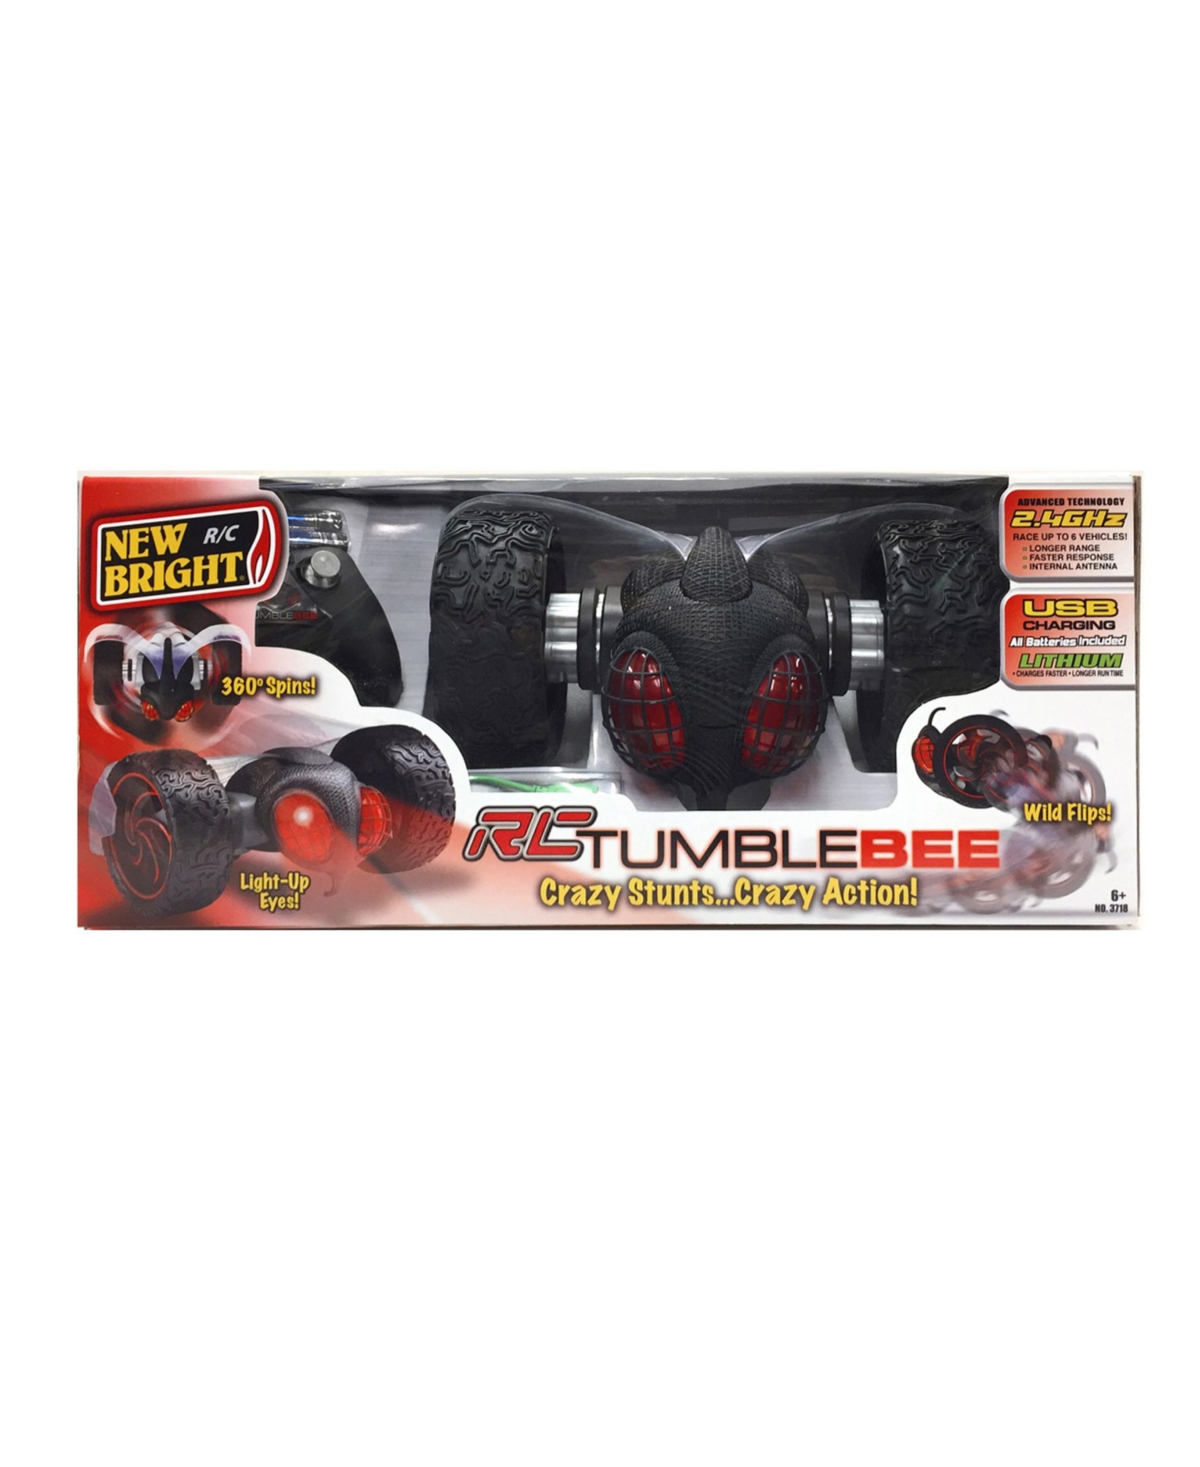 New Bright Kids' Radio Control Tumble Bee In Red